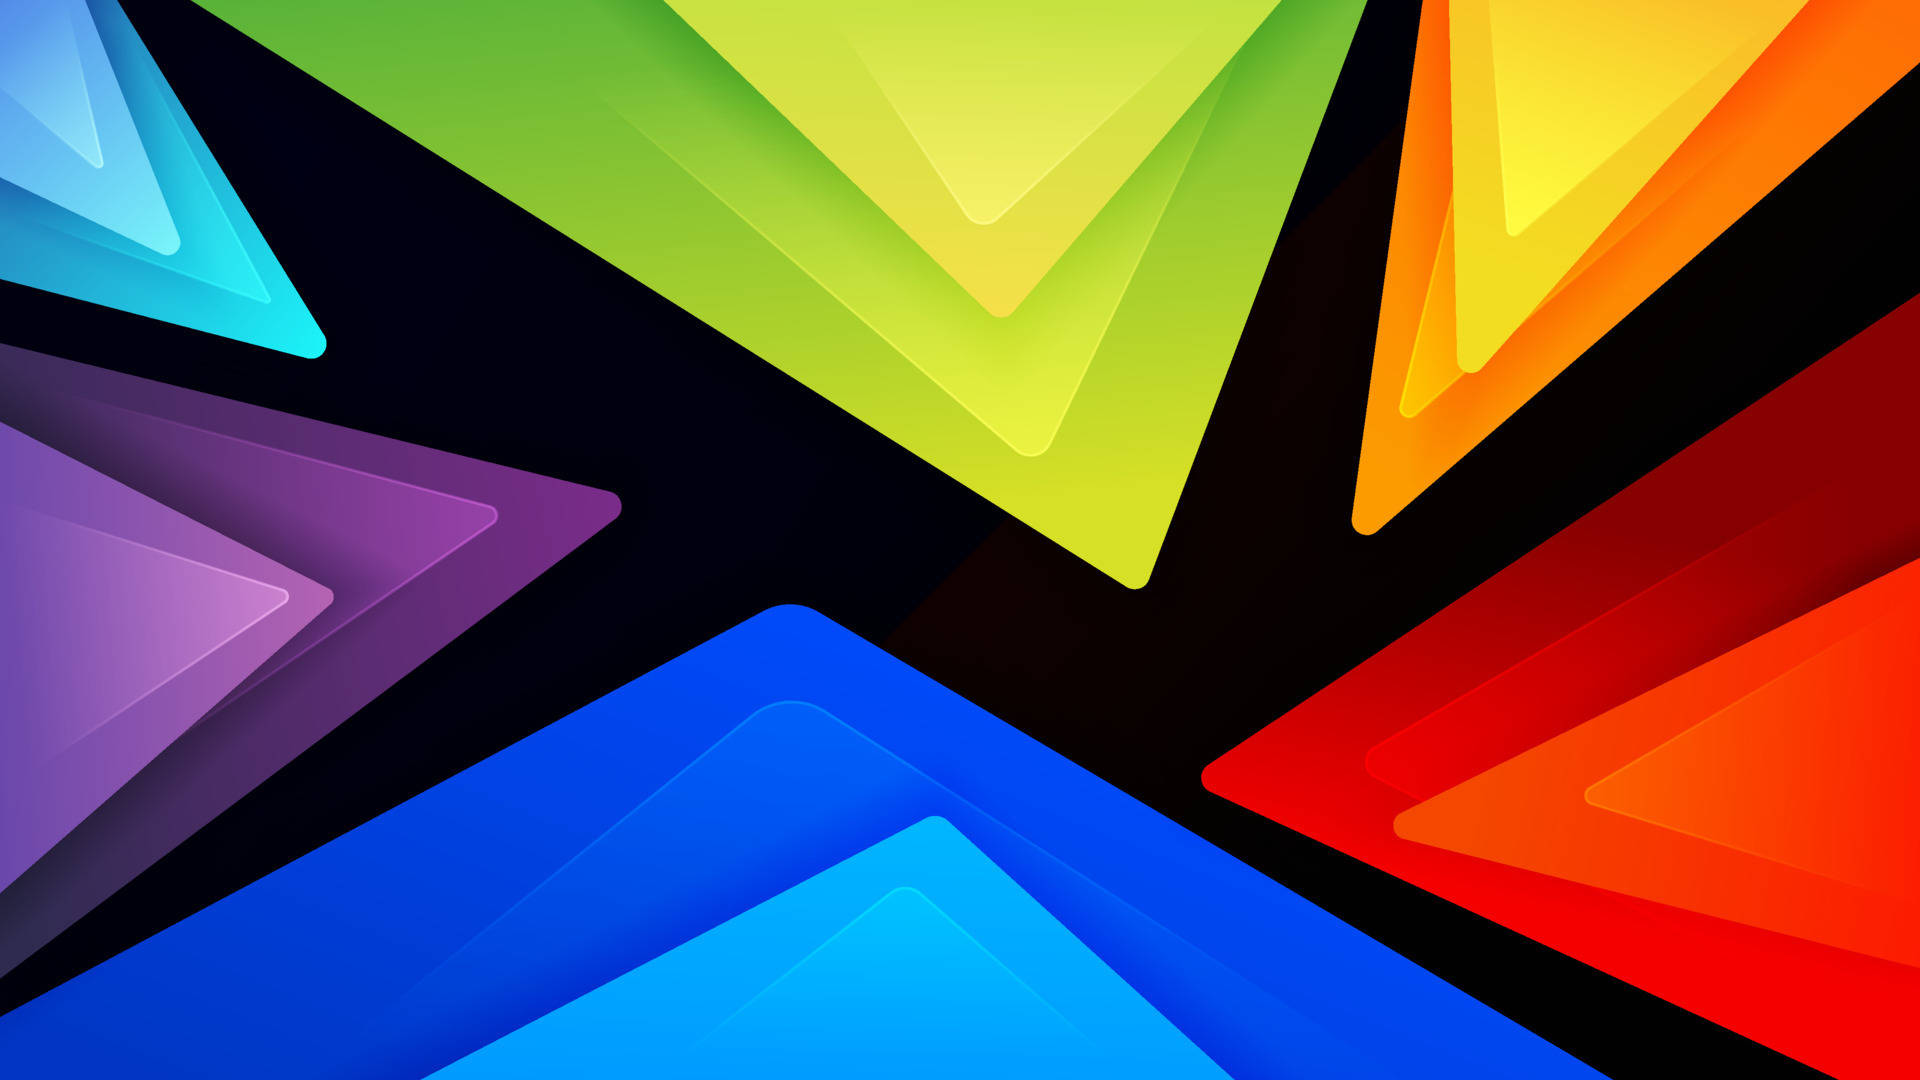 Ipad Pro 12.9 Colorful Triangles Background